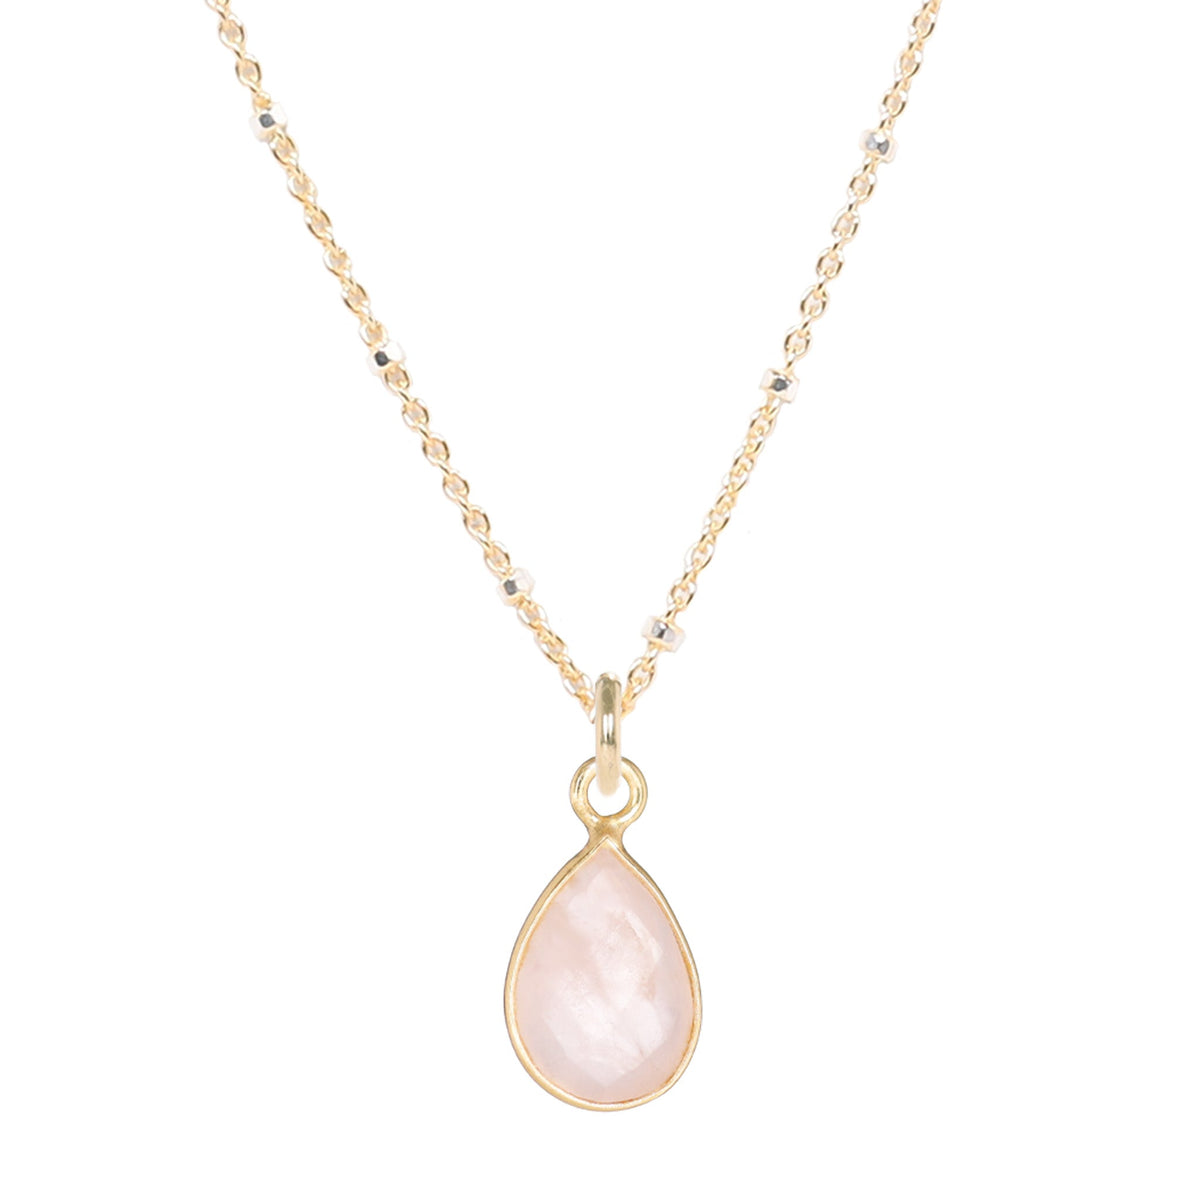 Gold Platted Sterling Silver Chain with Teardrop Rose Quartz in Gold Platted Sterling Silver Bezel